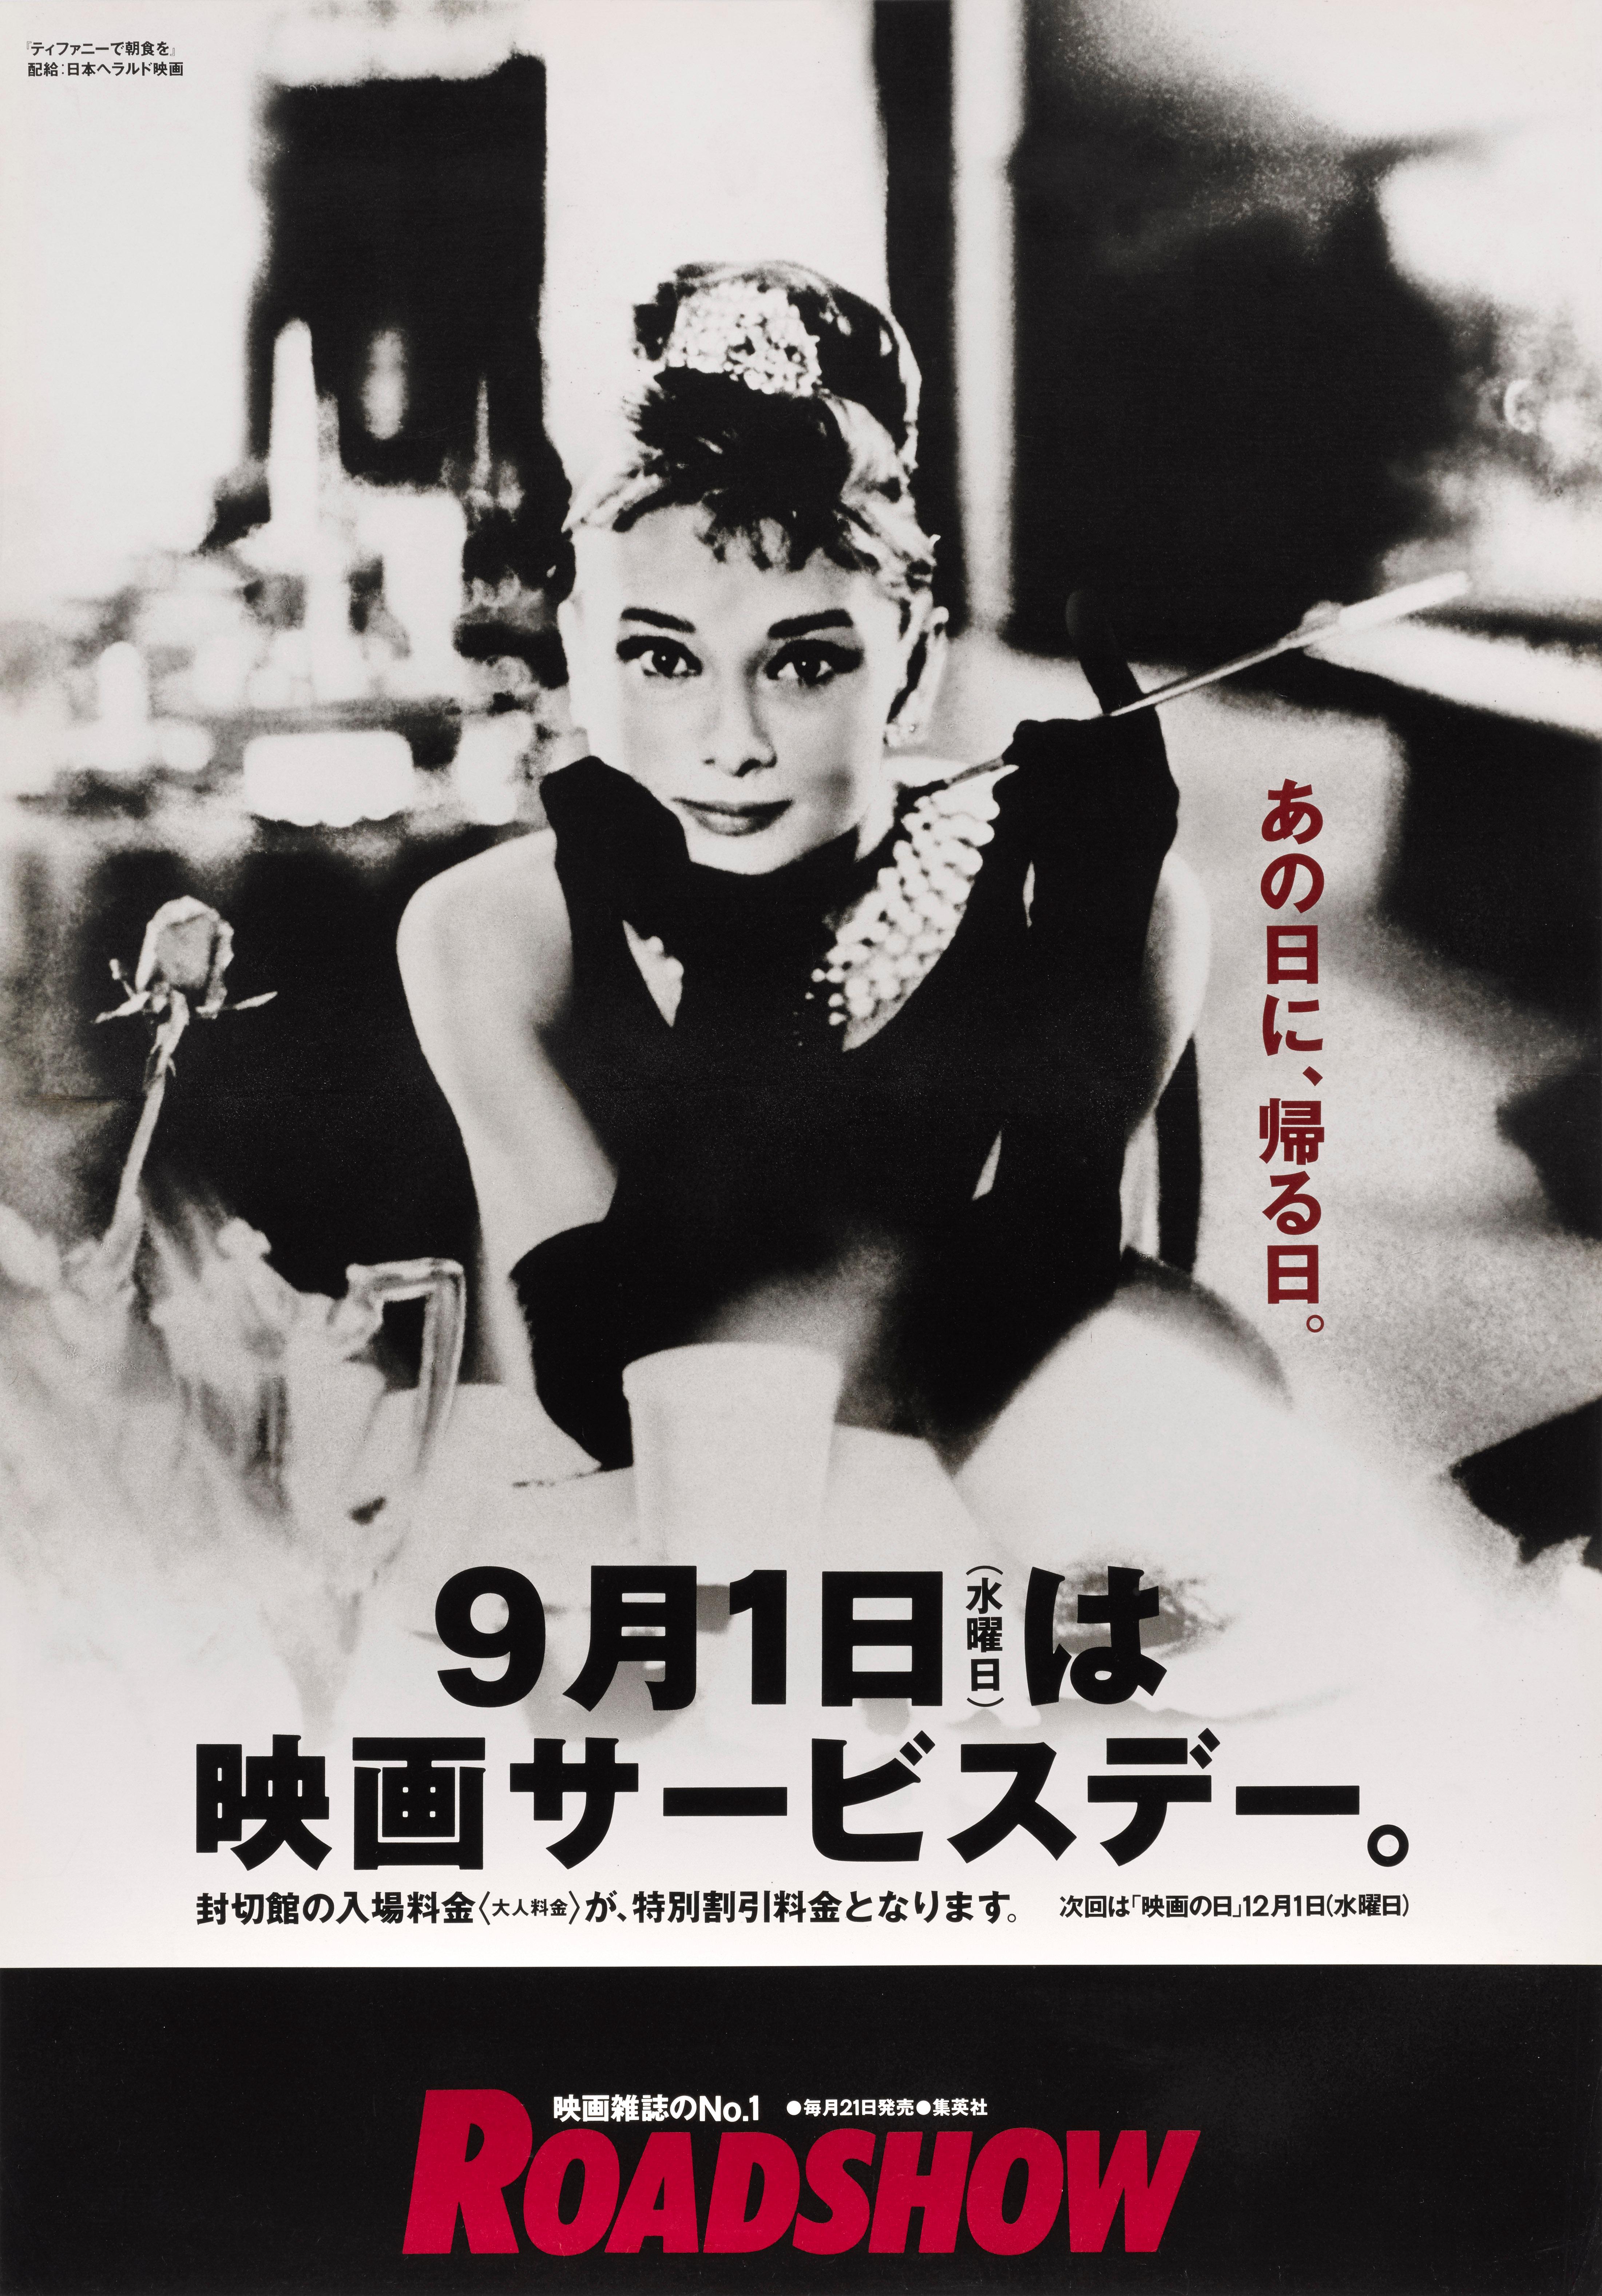 Original Japanese film poster for Audrey Hepburn's Classic 1961 film directed by Blake Edwards and starring George Peppard, Audrey Hepburn. This poster was designed for the re-release of the film in Japan in 1990.